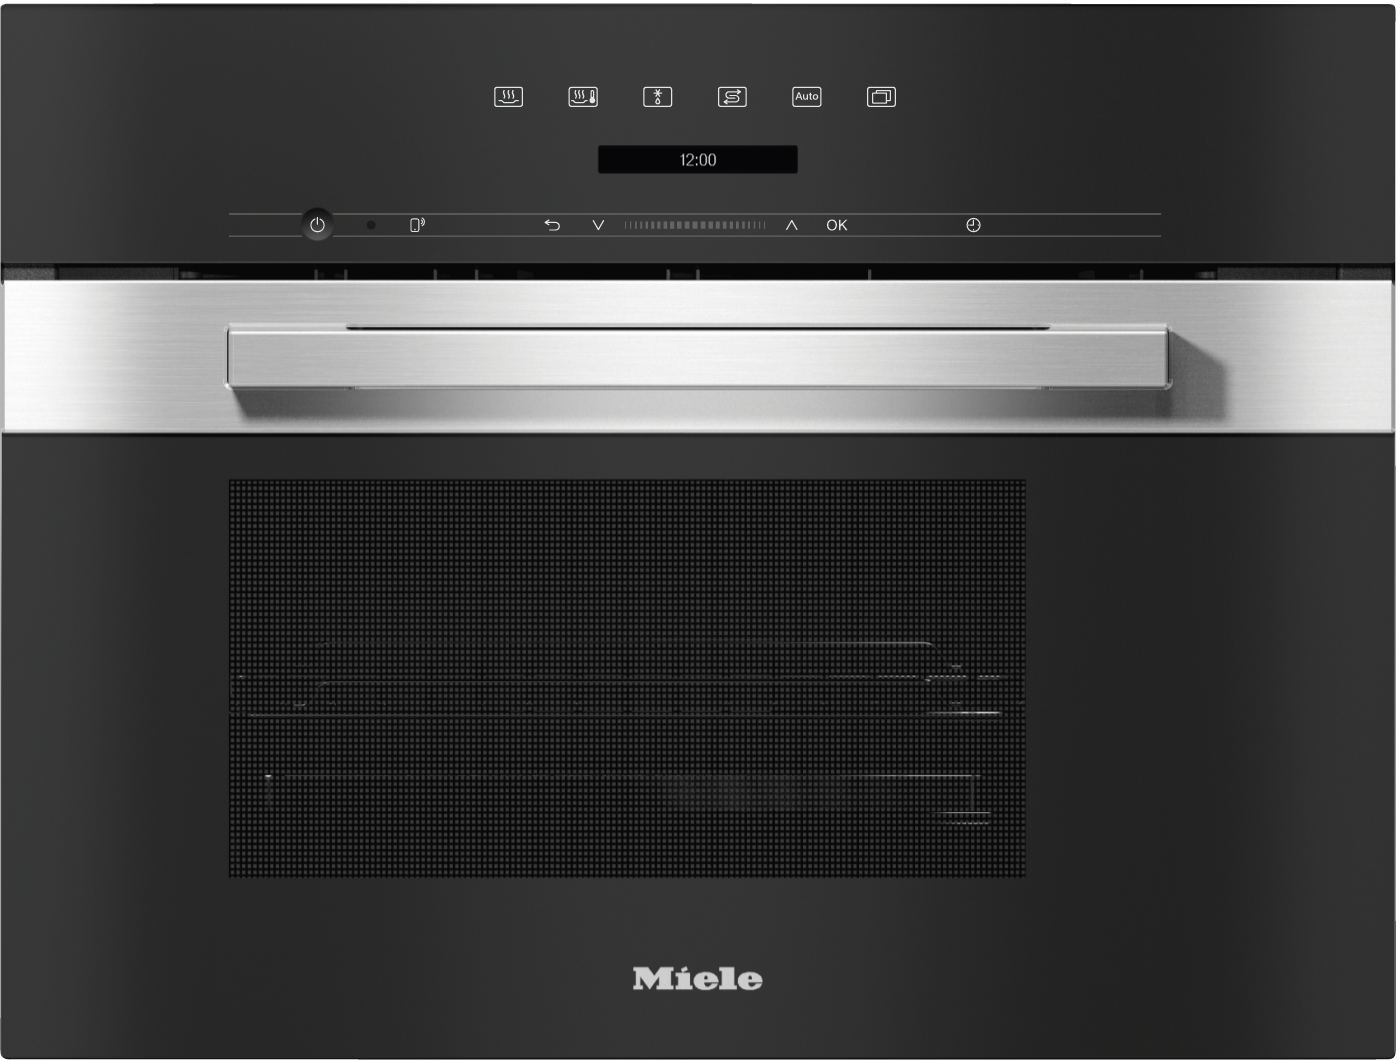 DG 7240Built-in steam oven for healthy cooking with automatic programmes and networking.